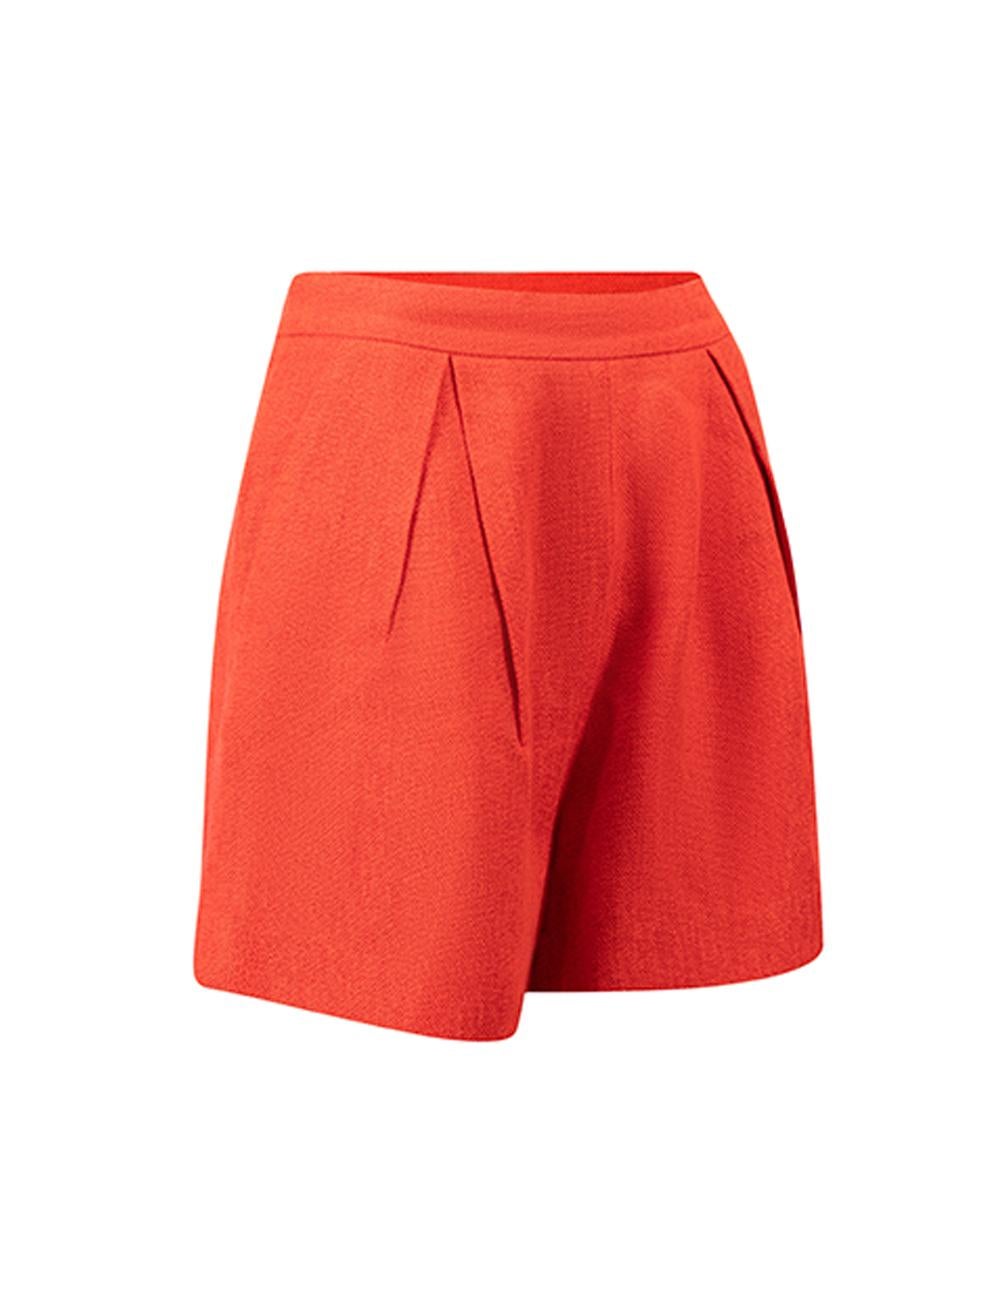 CONDITION is Good. Minor wear to shorts is evident. Light wear to left side with black markings on this used Giambattista Valli designer resale item. 
 
 Details
  Red
 Viscose
 Shorts
 Woven
 High rise
 Side zip closure with hook and eye
 
 
 Made